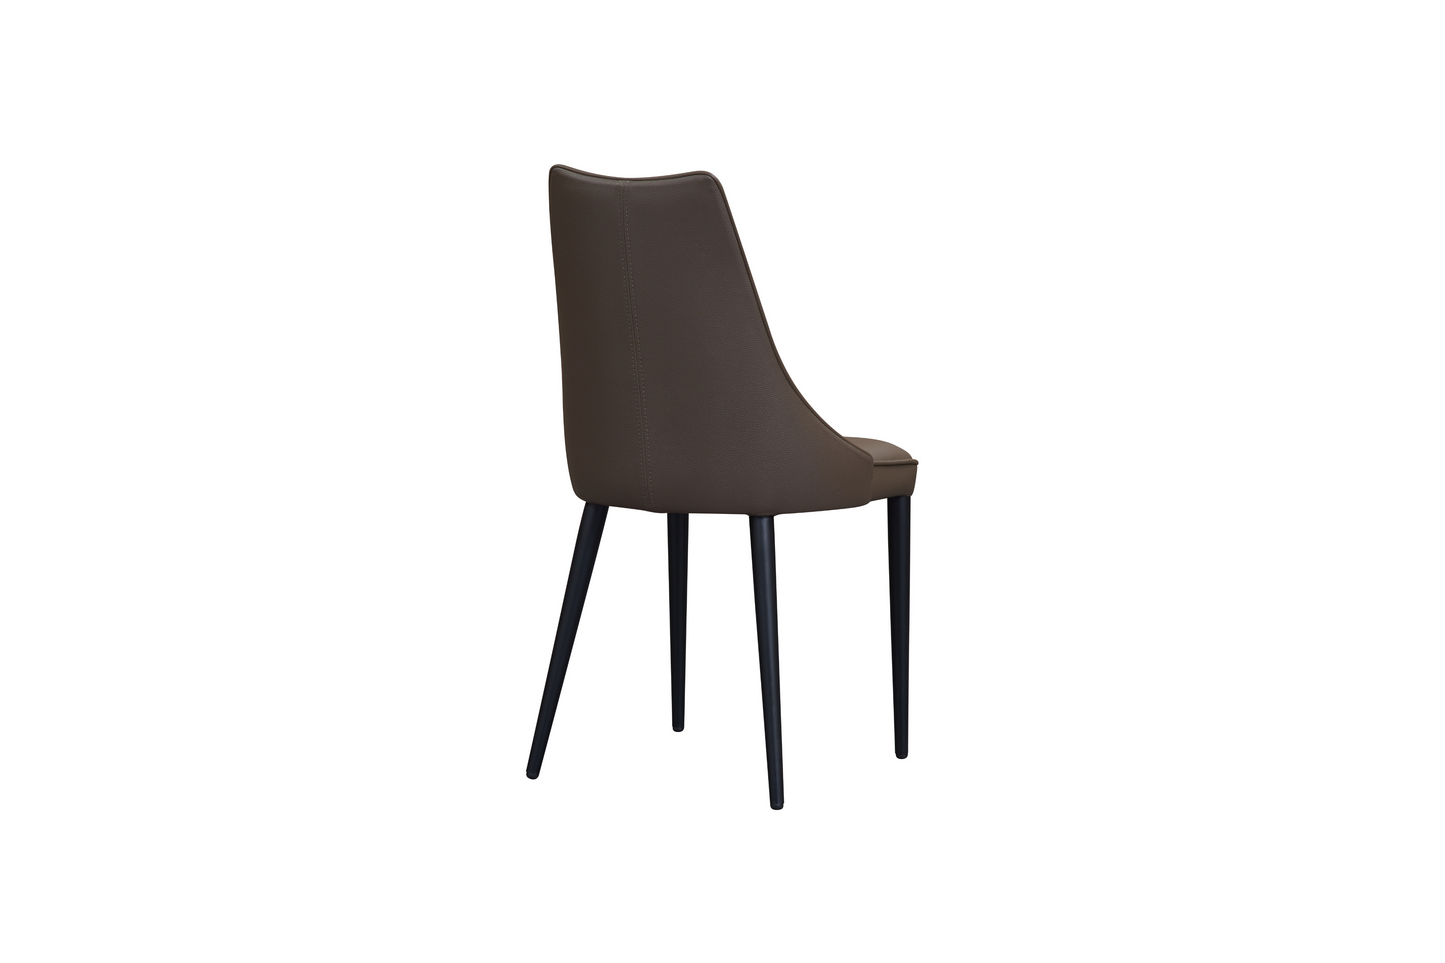 Milano Leather Dining Chair SKU: 18991-C